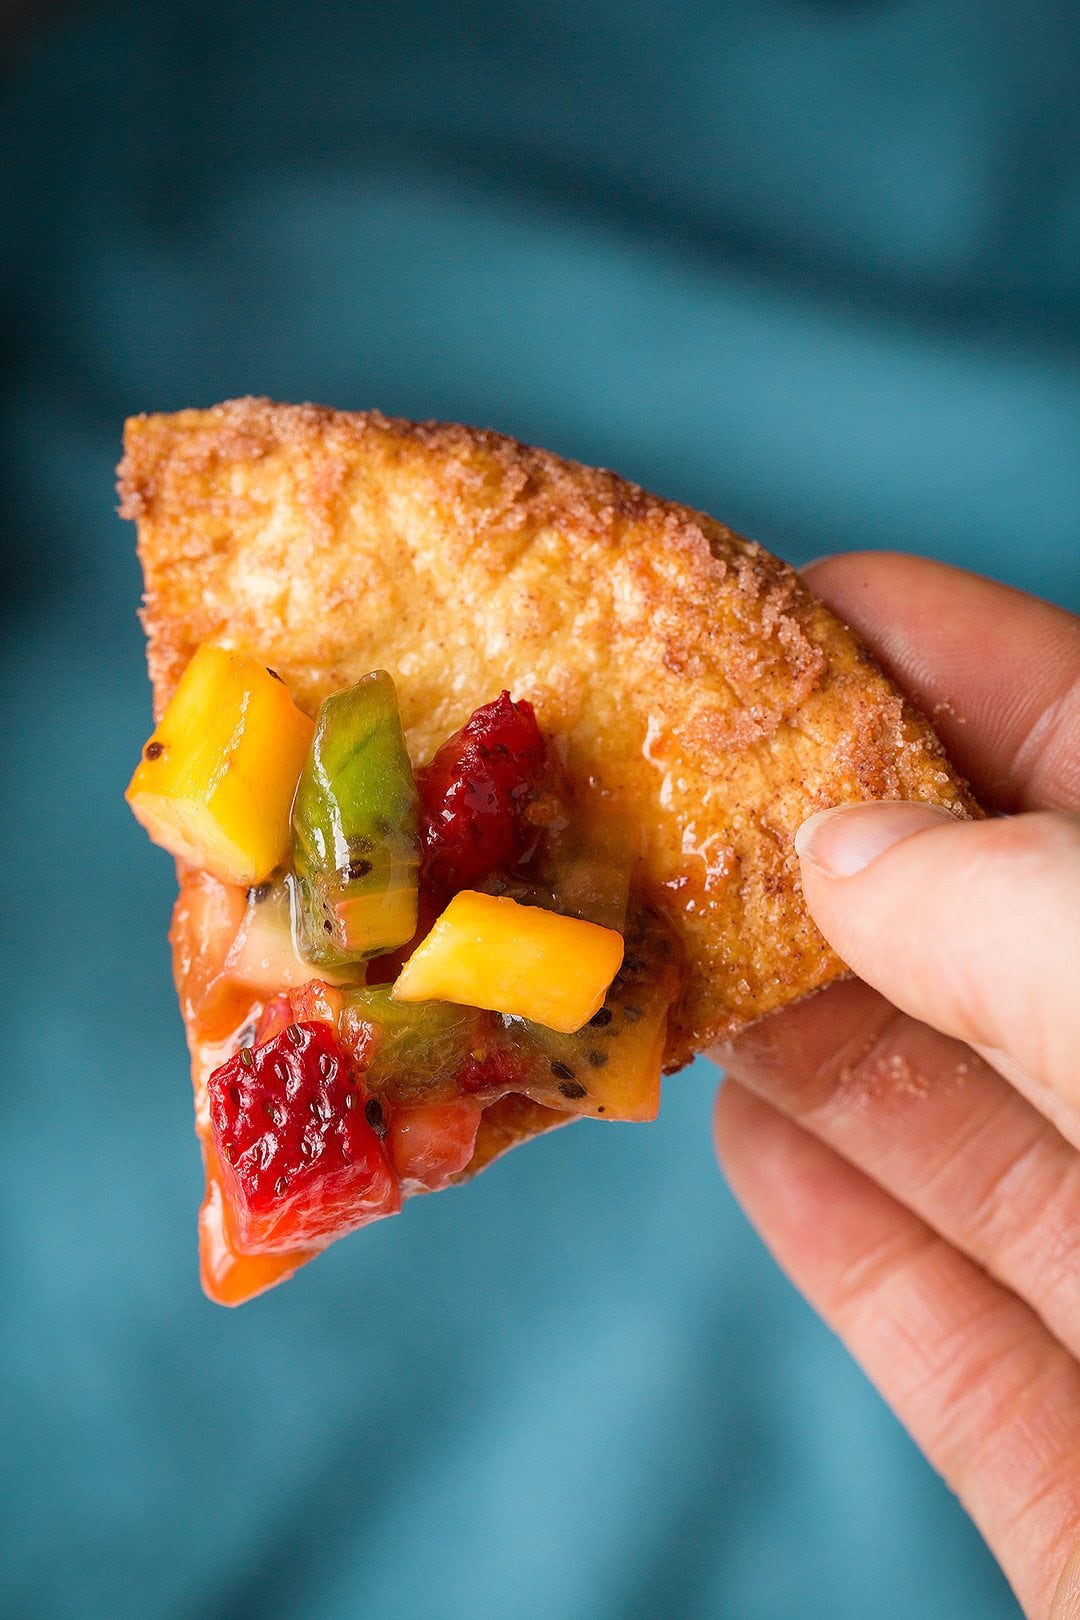 holding a cinnamon chip with fruit salsa